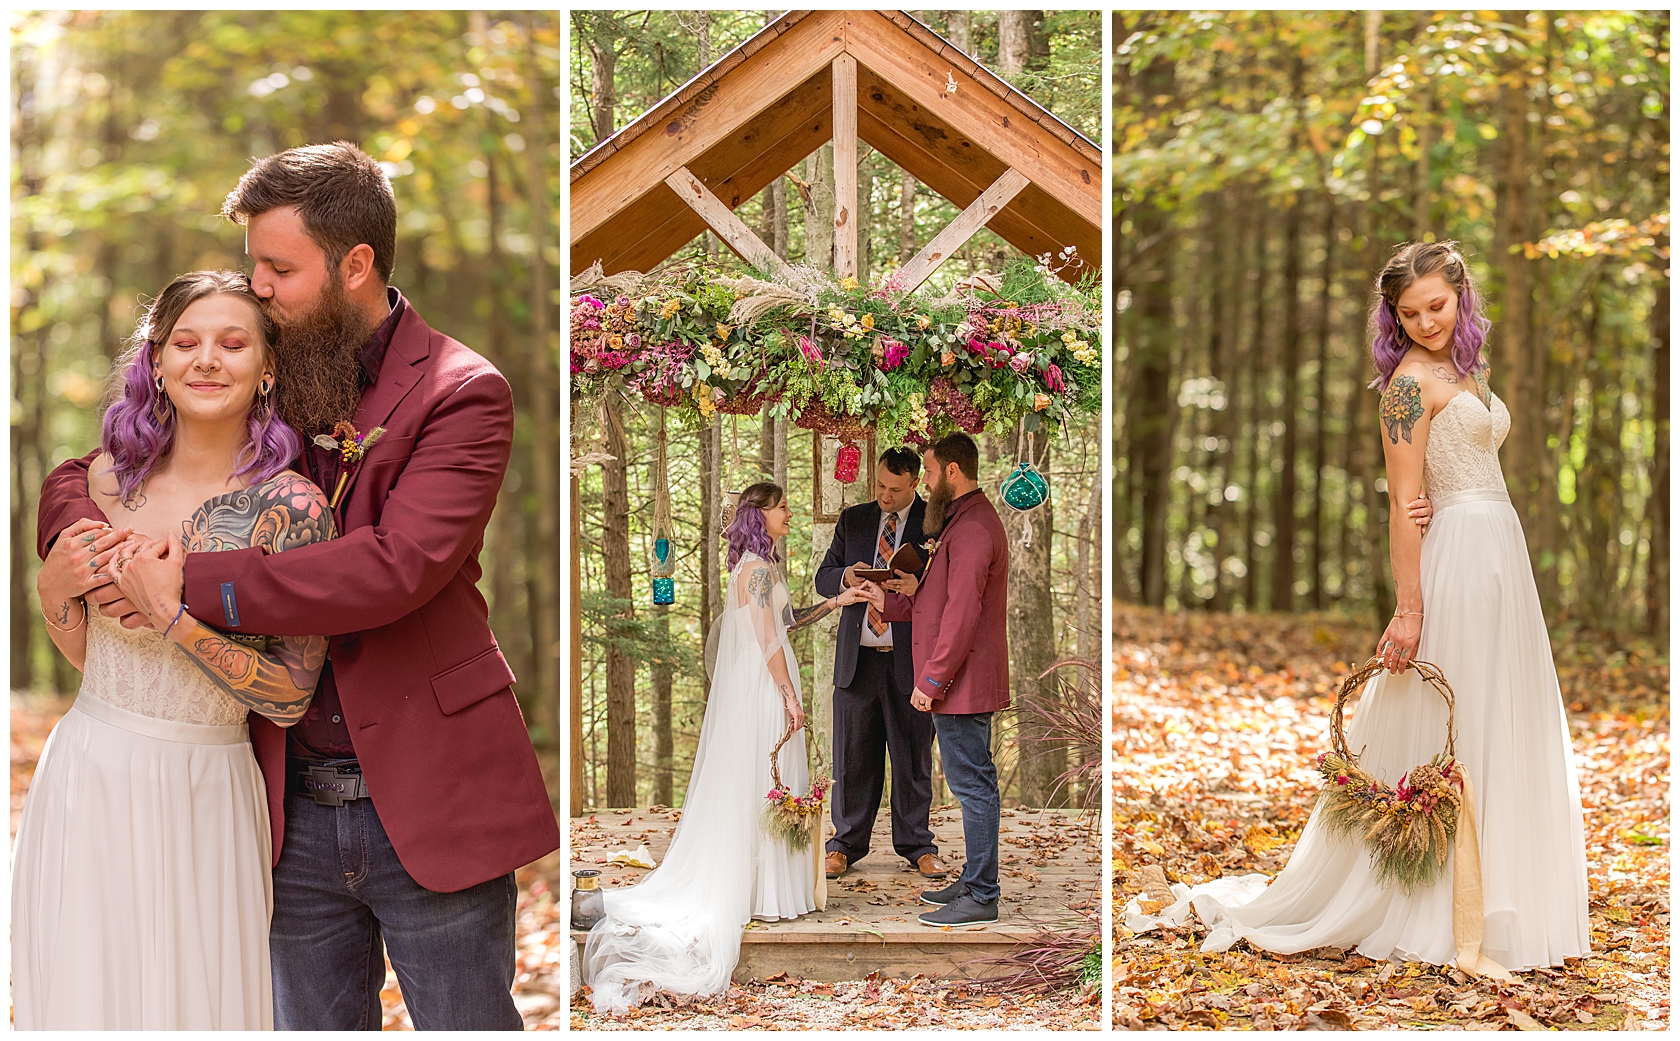 Kentucky Wedding Photographer at Hemlock Springs a Kentucky Wedding Venue in the Red River Gorge